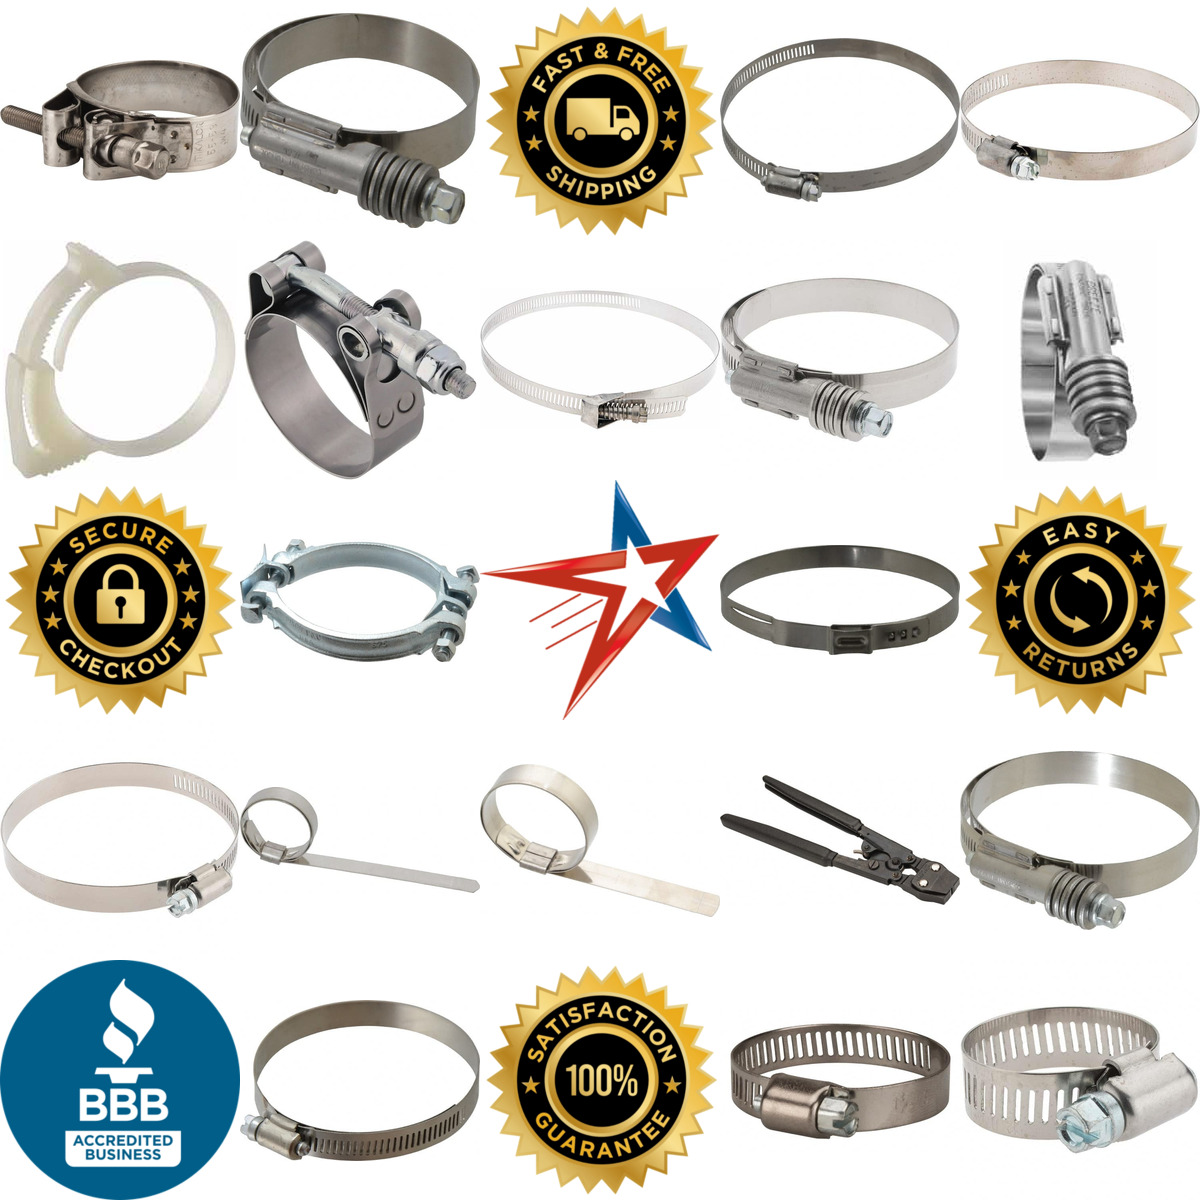 A selection of Hose Clamps and Clamping Tools products on GoVets